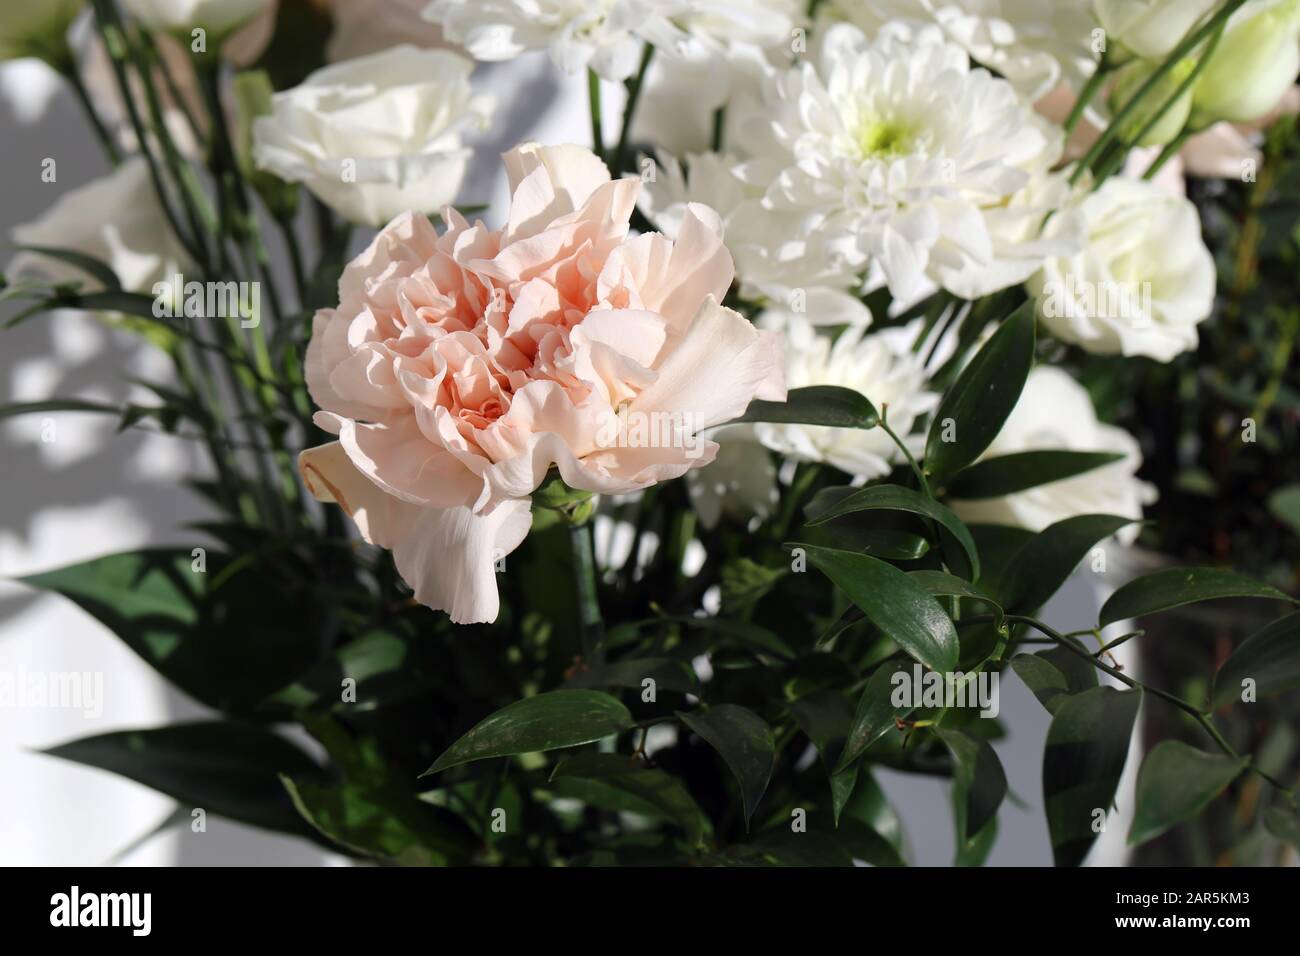 Super cute, light color flower bouquets including baby pink and white dianthus flowers with white chrysanthemum flowers, and some other white flowers. Stock Photo